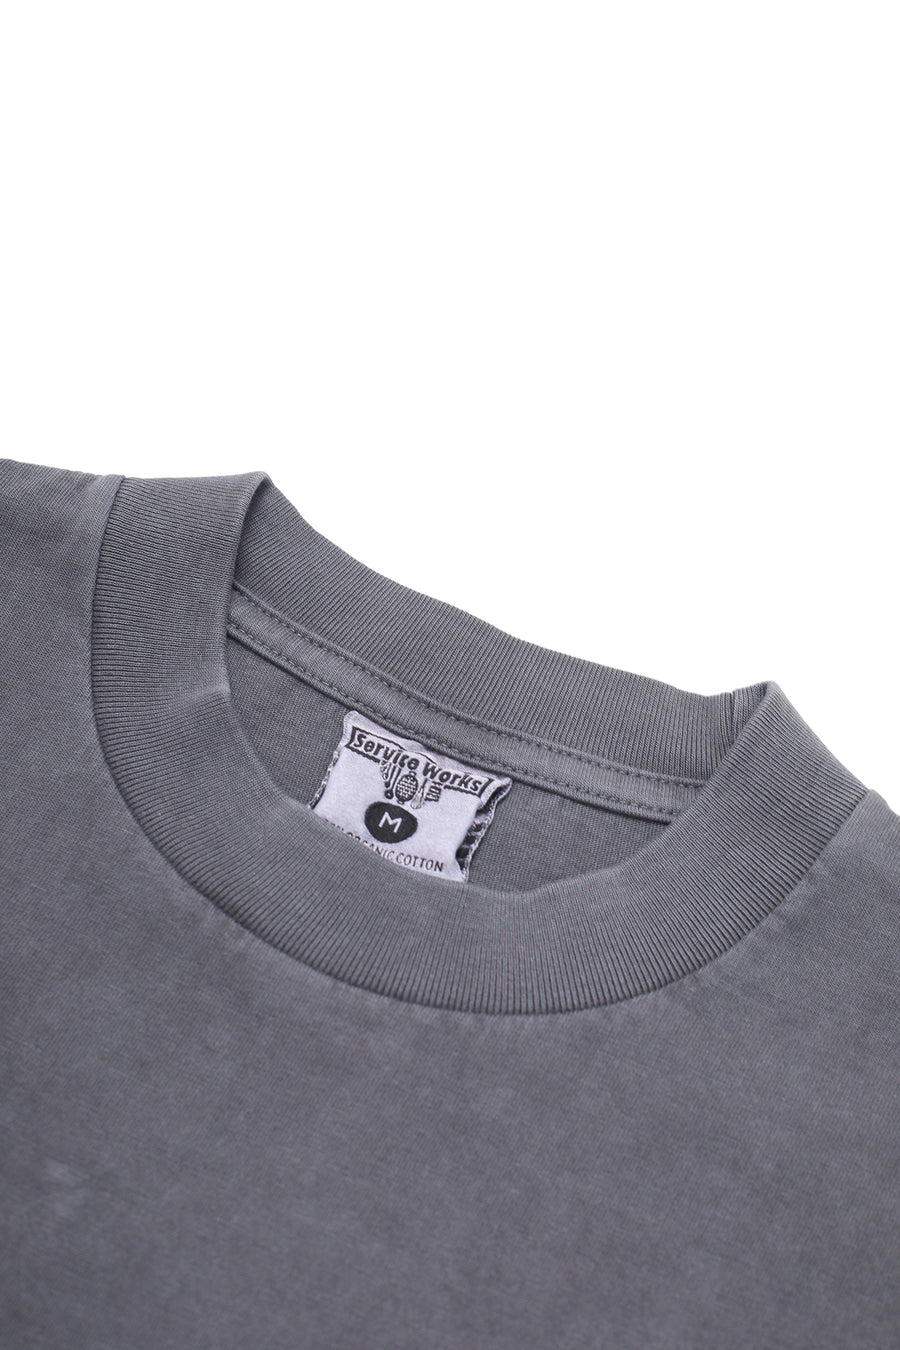 Chase T-Shirt (Charcoal)